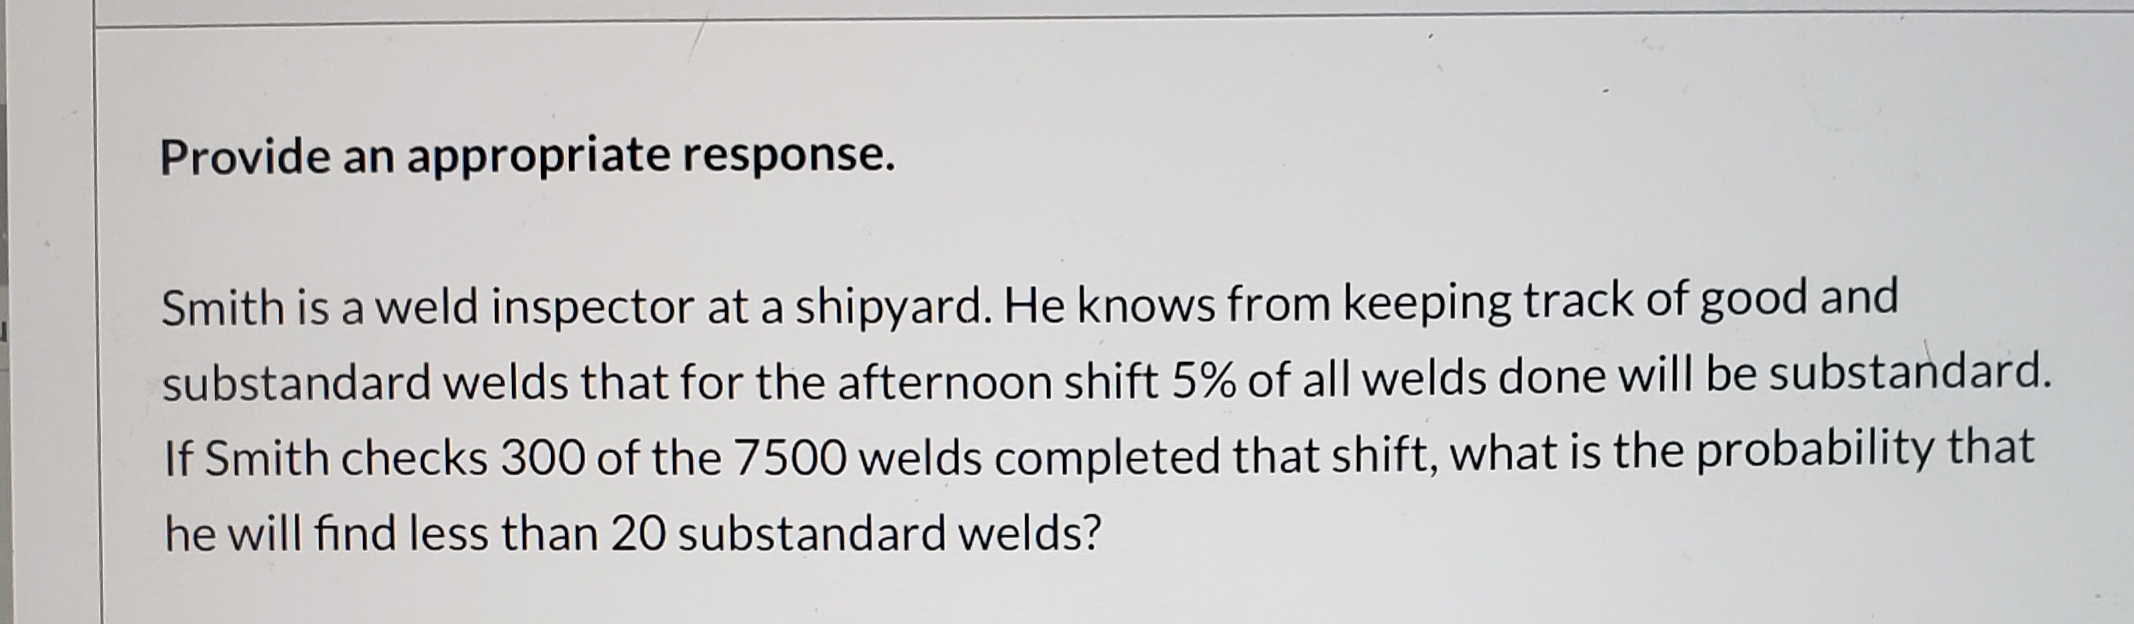 Provide an appropriate response.
Smith is a weld inspector at a shipyard. He knows from keeping track of good and
substandard welds that for the afternoon shift 5% of all welds done will be substandard.
If Smith checks 300 of the 7500 welds completed that shift, what is the probability that
he will find less than 20 substandard welds?
